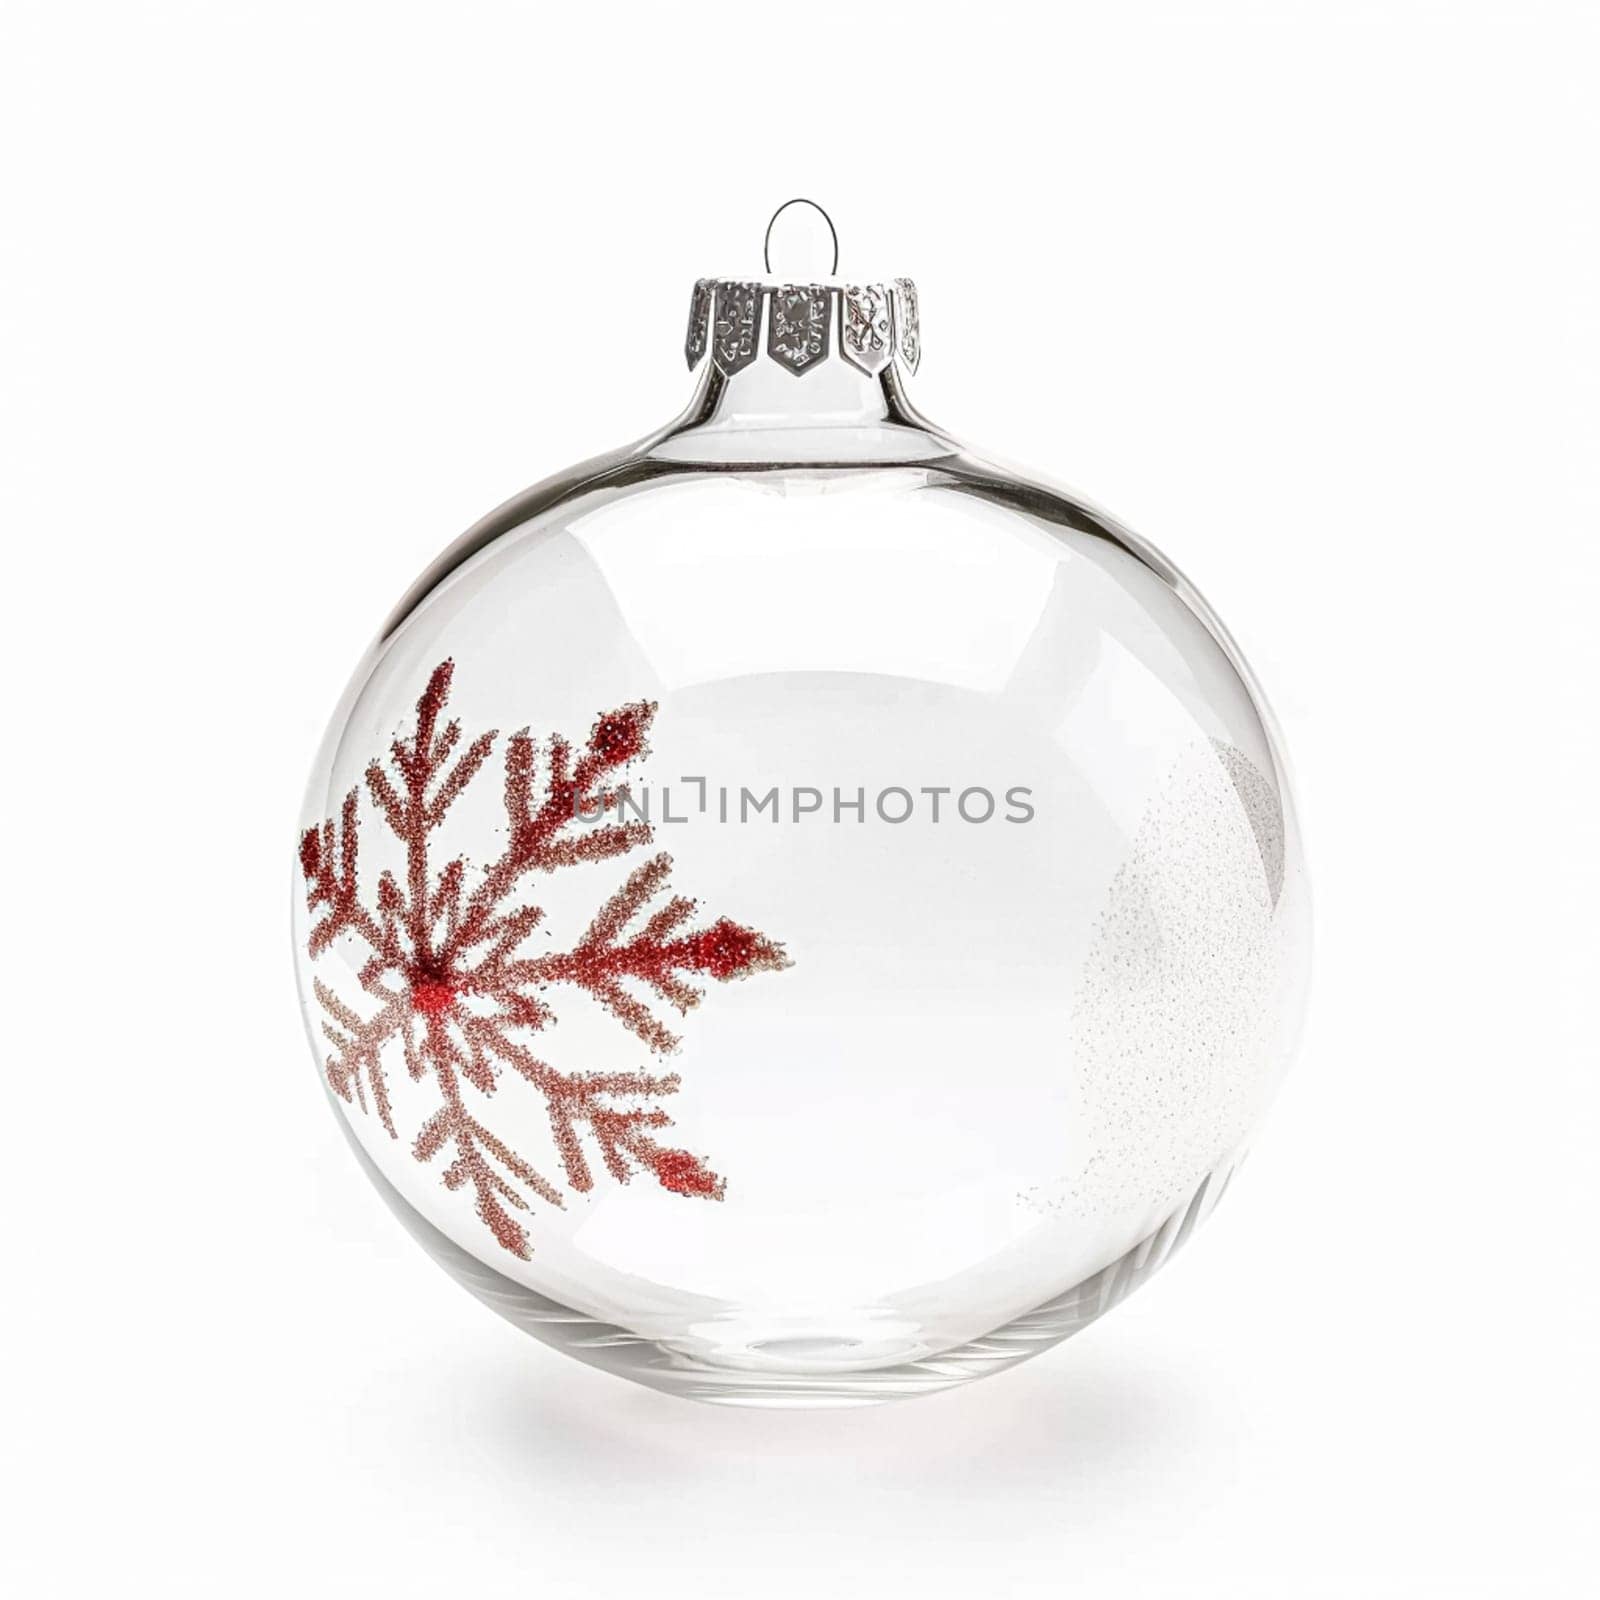 Transparent glass Christmas bauble isolated on white background, holiday decor and design, Merry Christmas and Happy Holidays by Anneleven